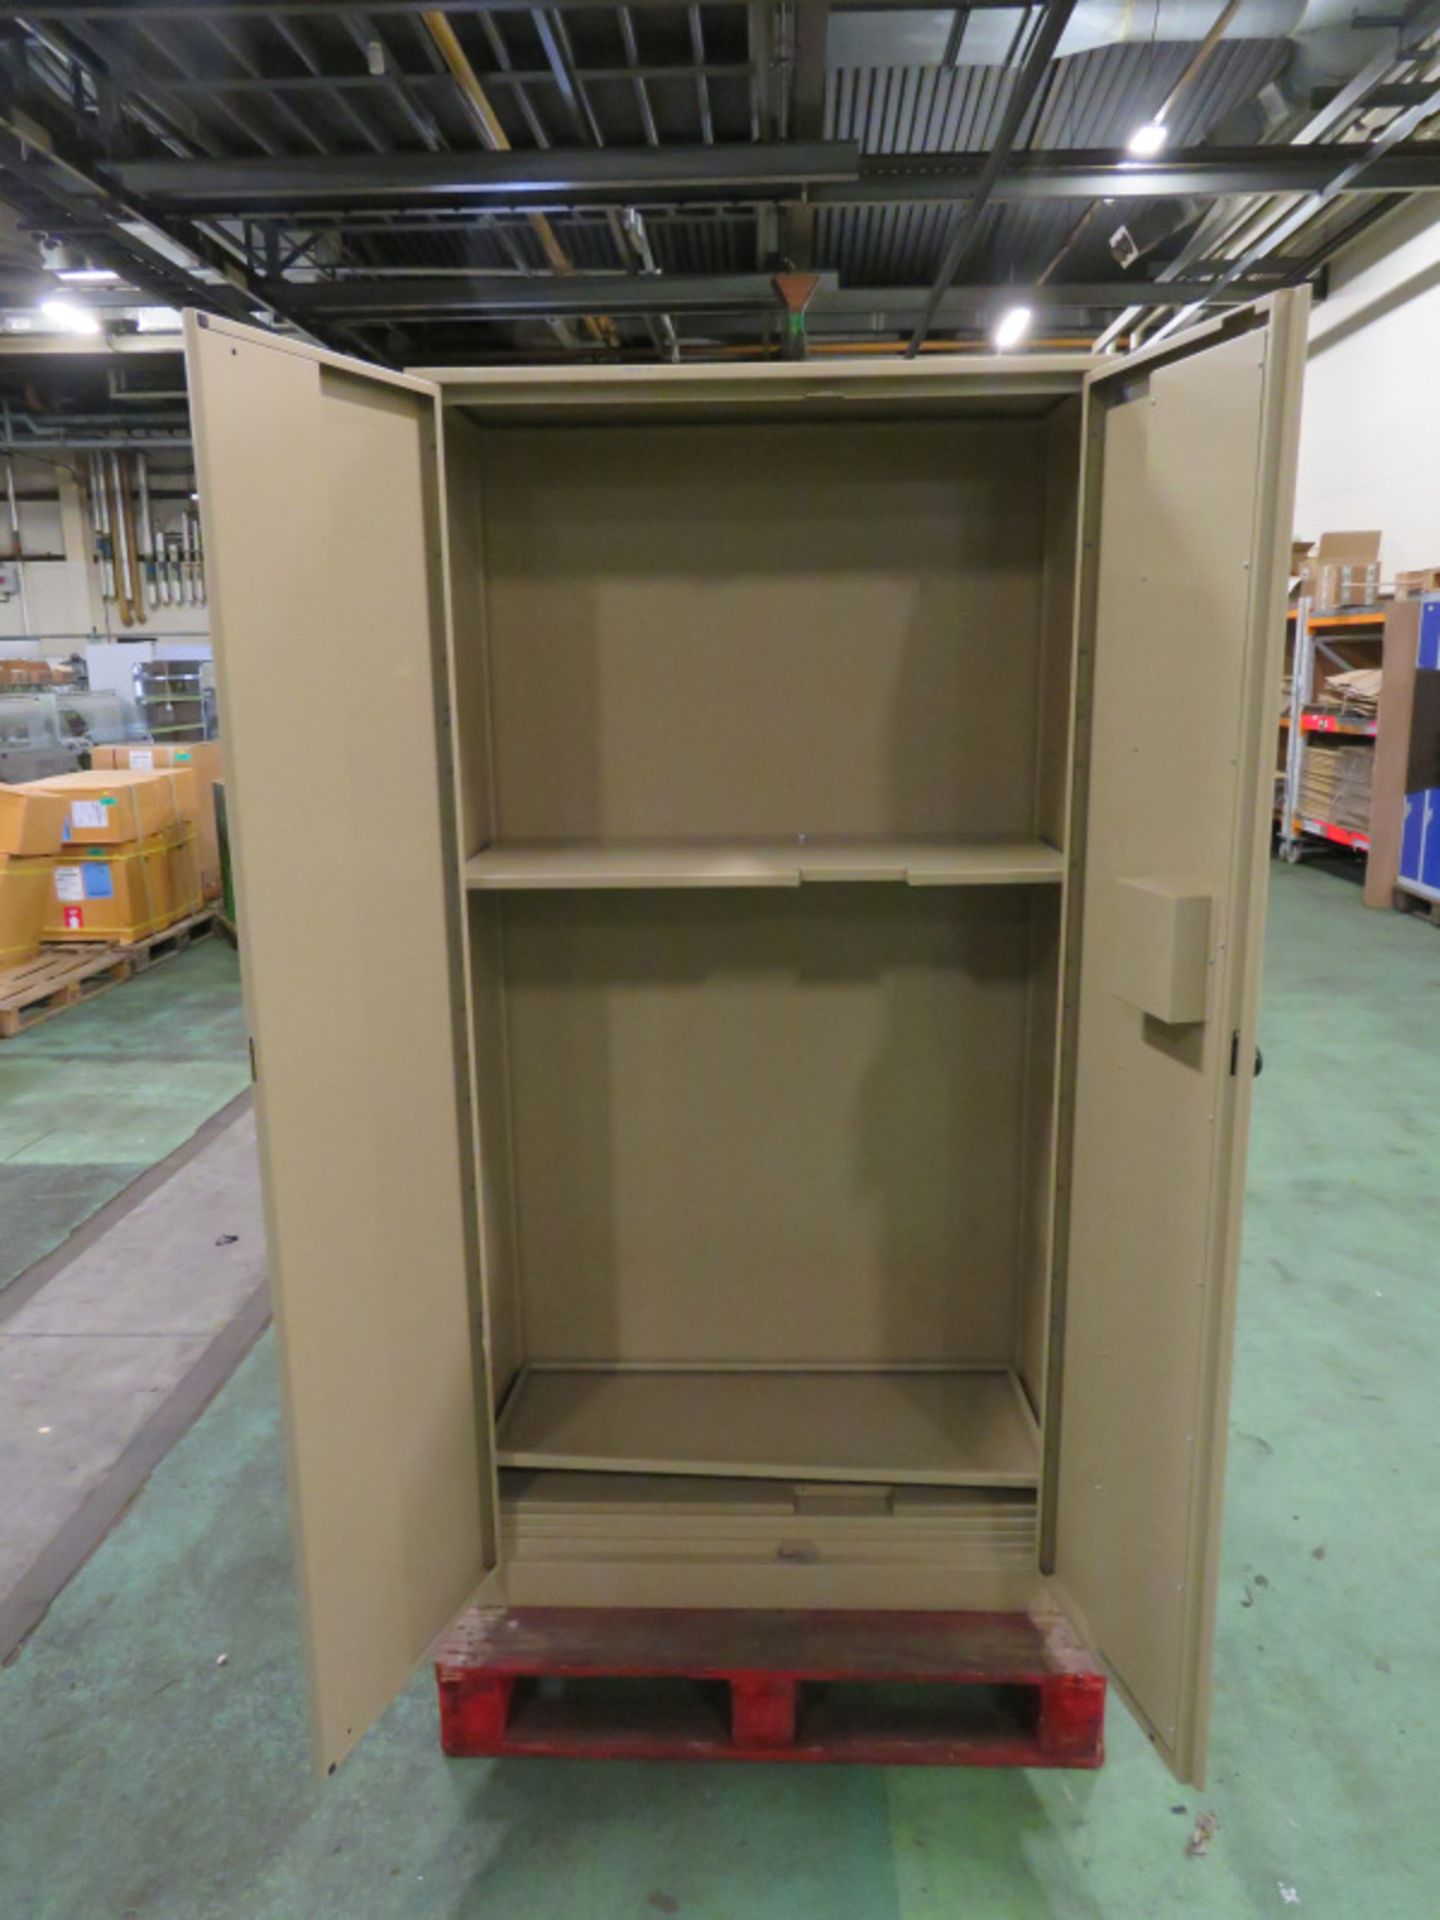 2x Metal Combination Cabinets L 920mm x W 480mm x H 1830mm - Image 3 of 5